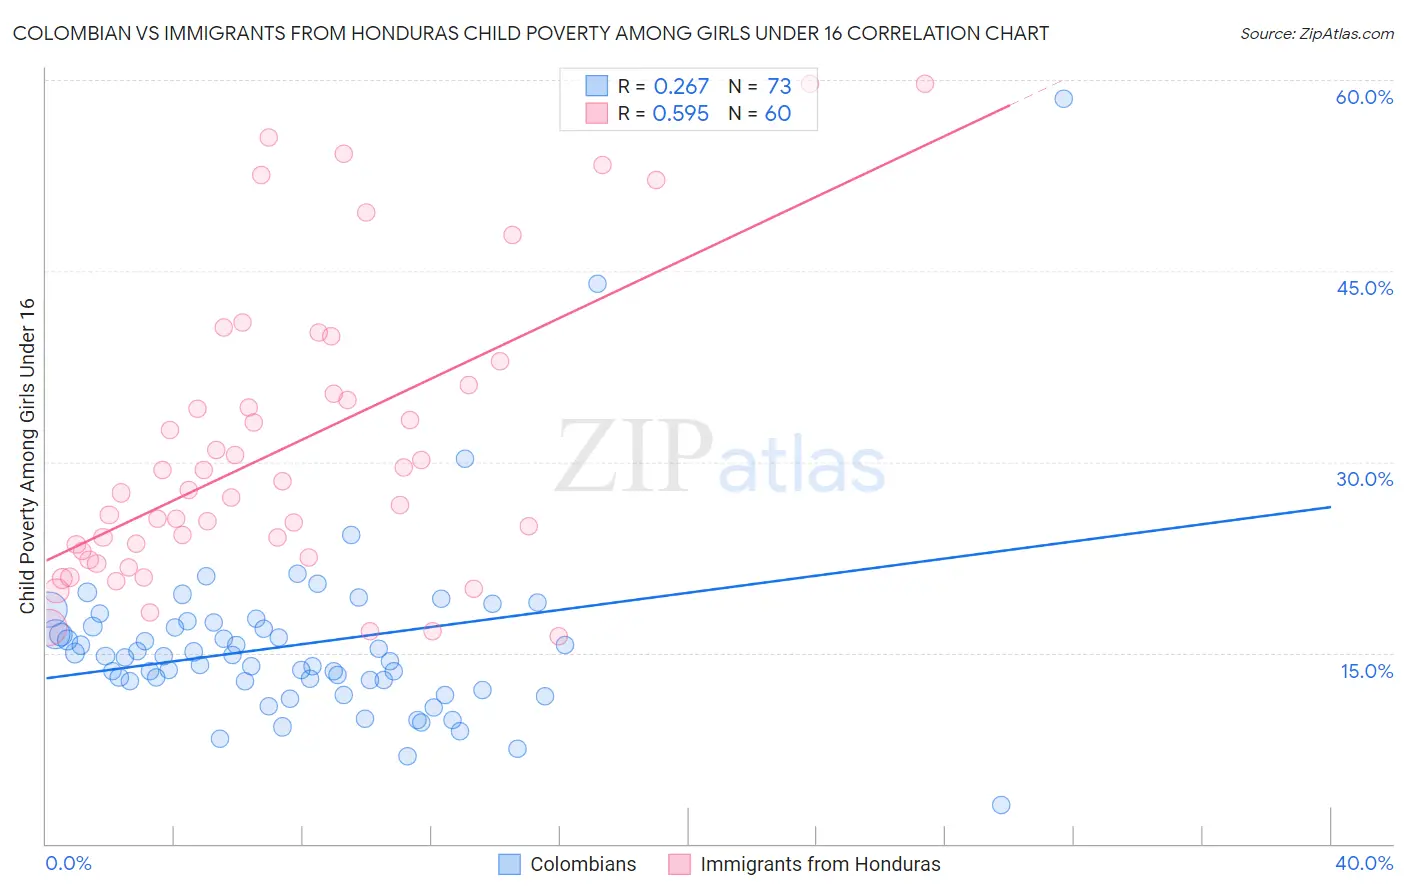 Colombian vs Immigrants from Honduras Child Poverty Among Girls Under 16